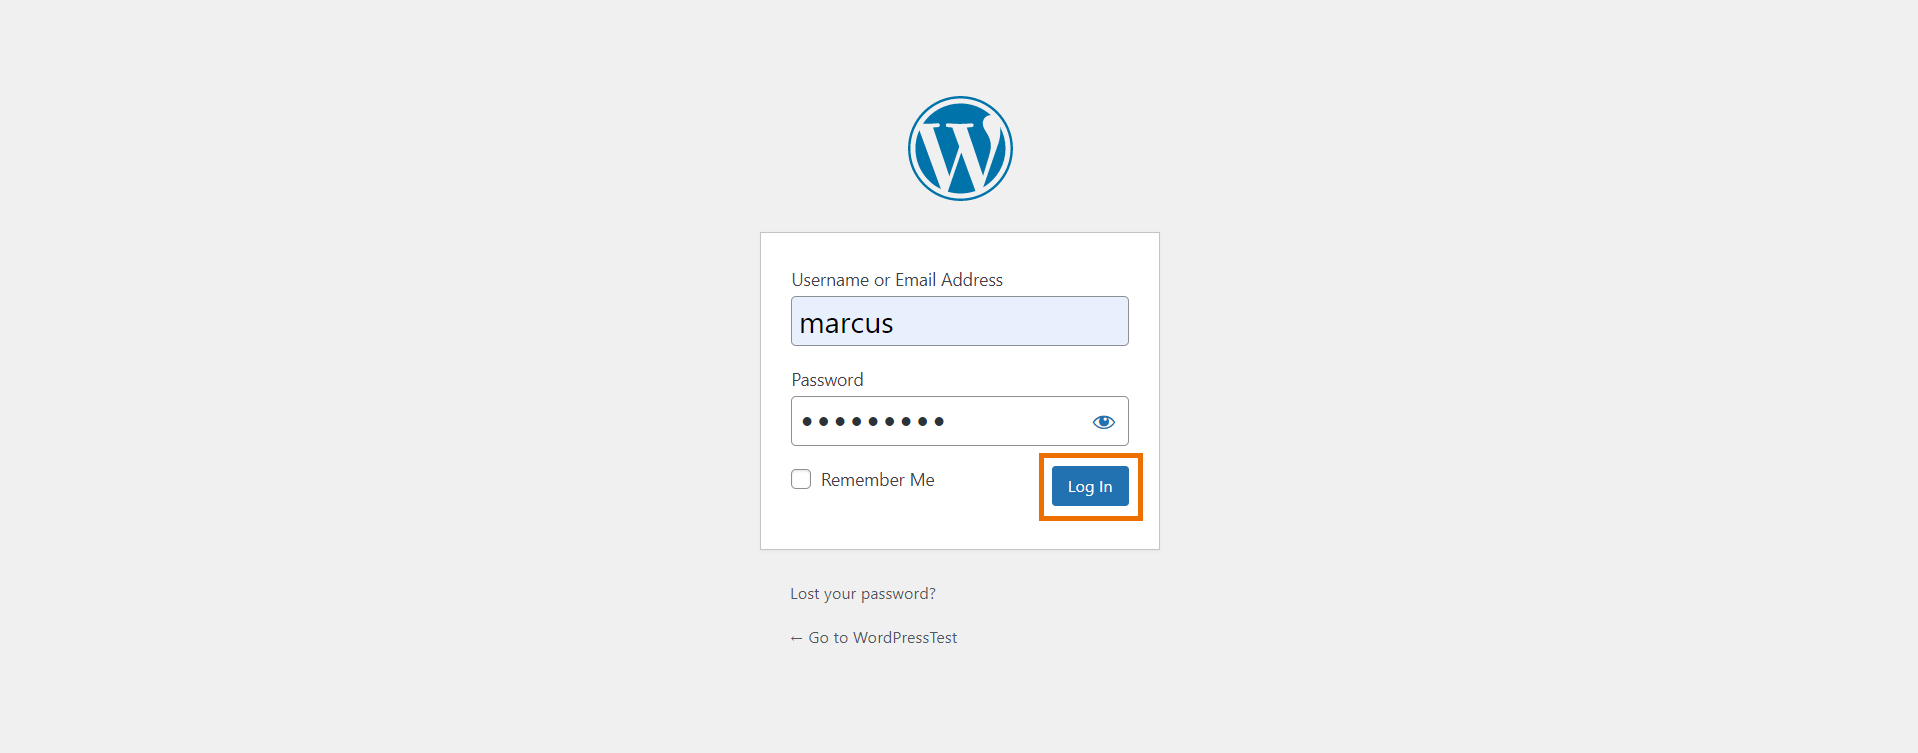 WordPress login page to demonstrate Password Sync with LDAP Server